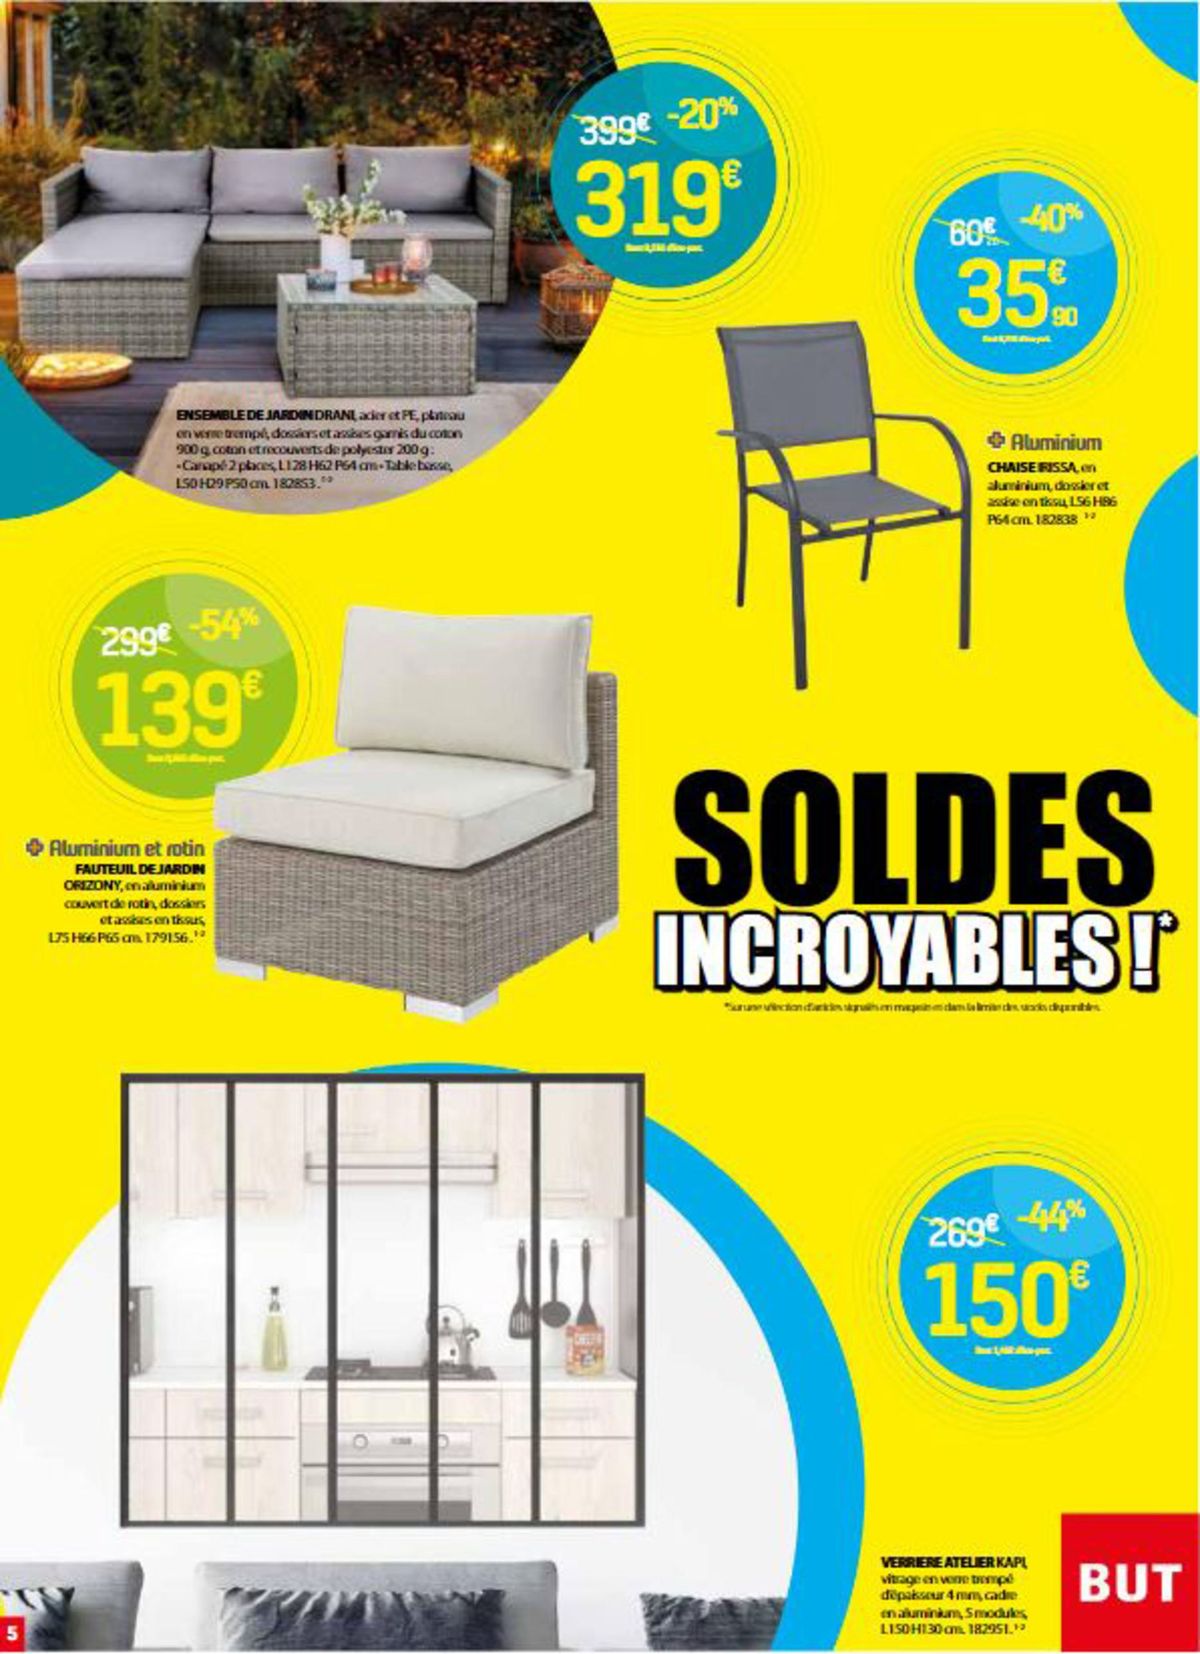 Catalogue Soldes incroyables !, page 00005